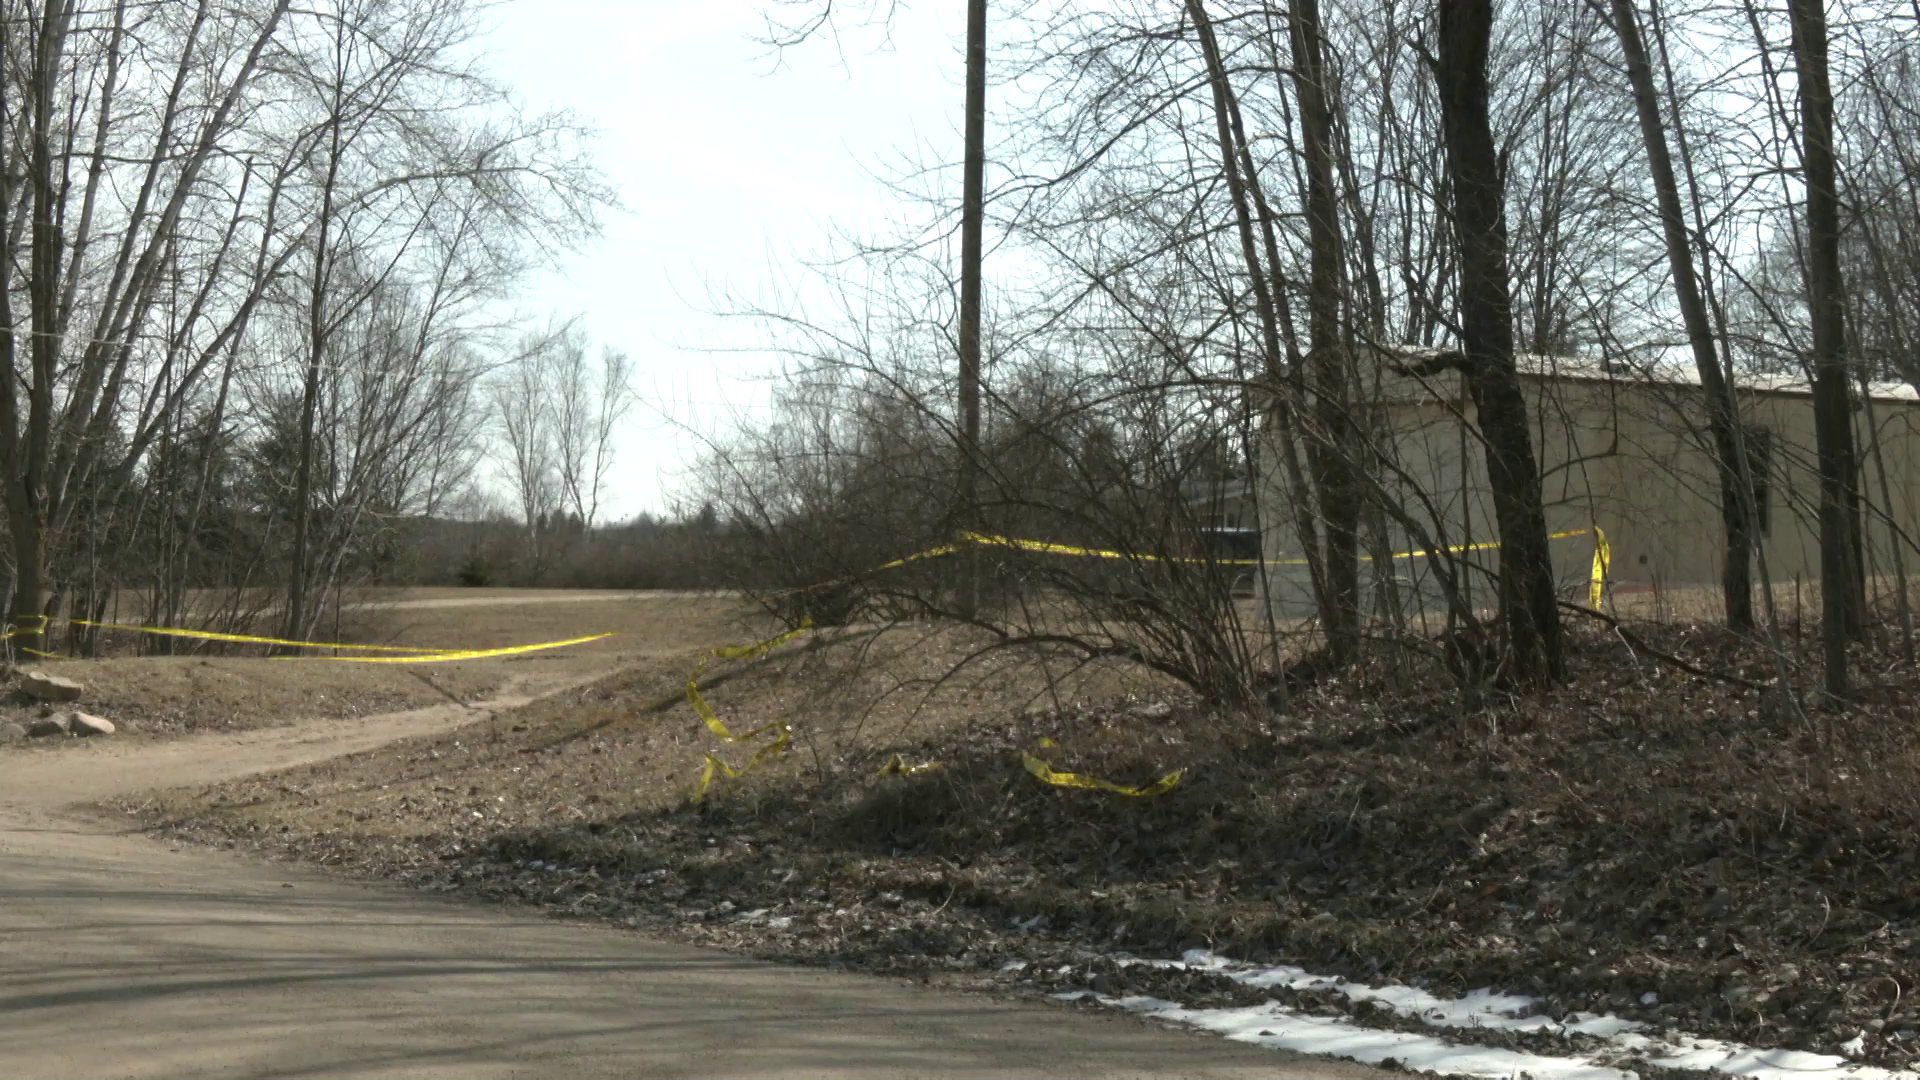 16-year-old boy charged with murdering his father, Mecosta Co. District Court says